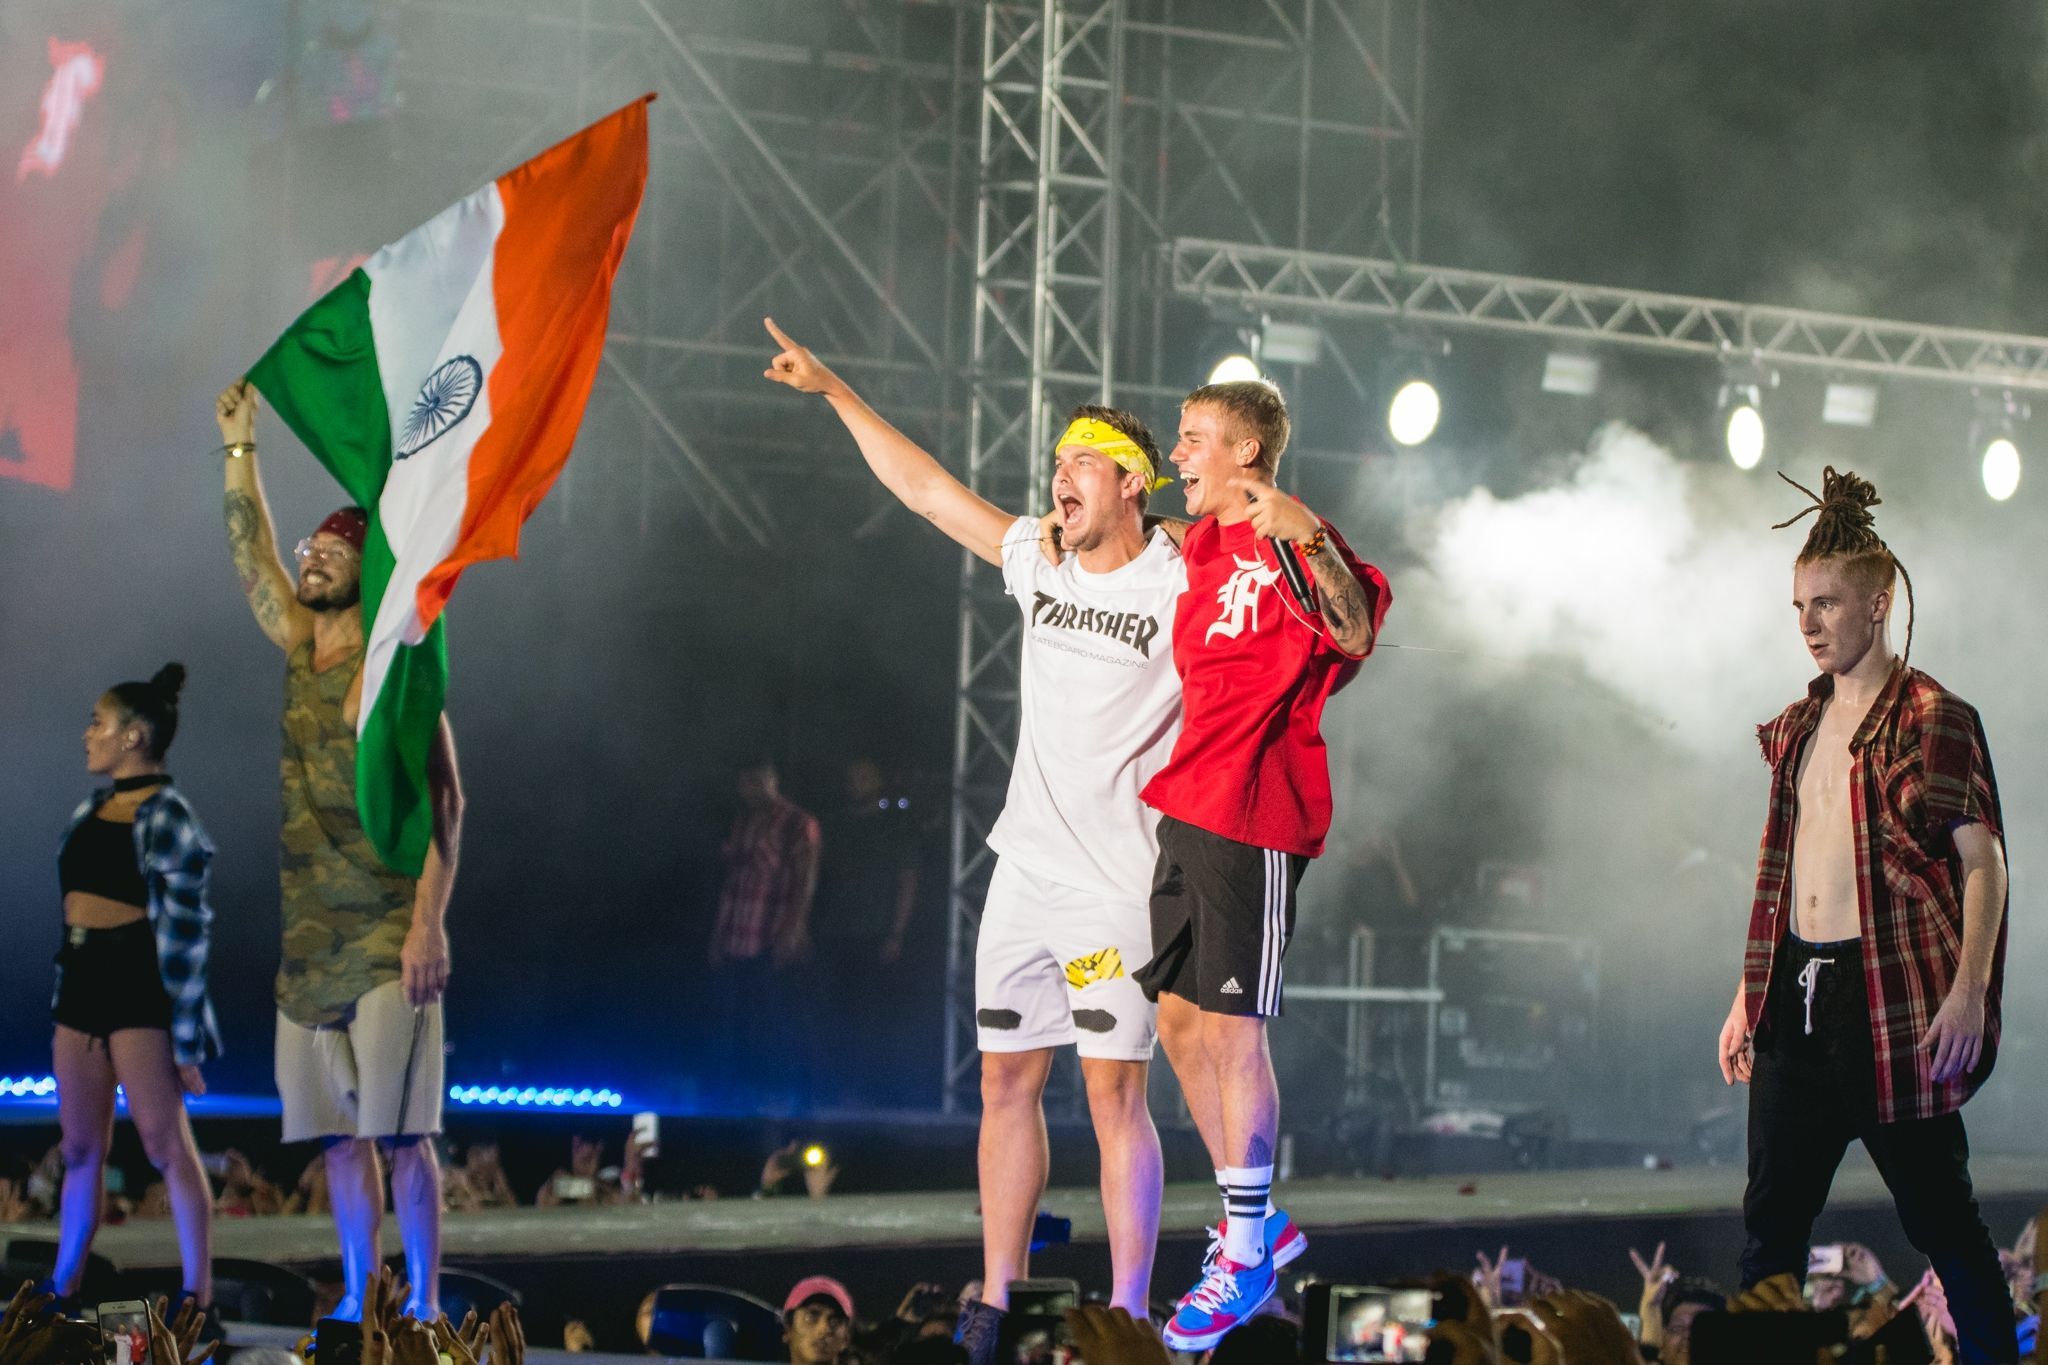 Justine Bieber at a past show in India